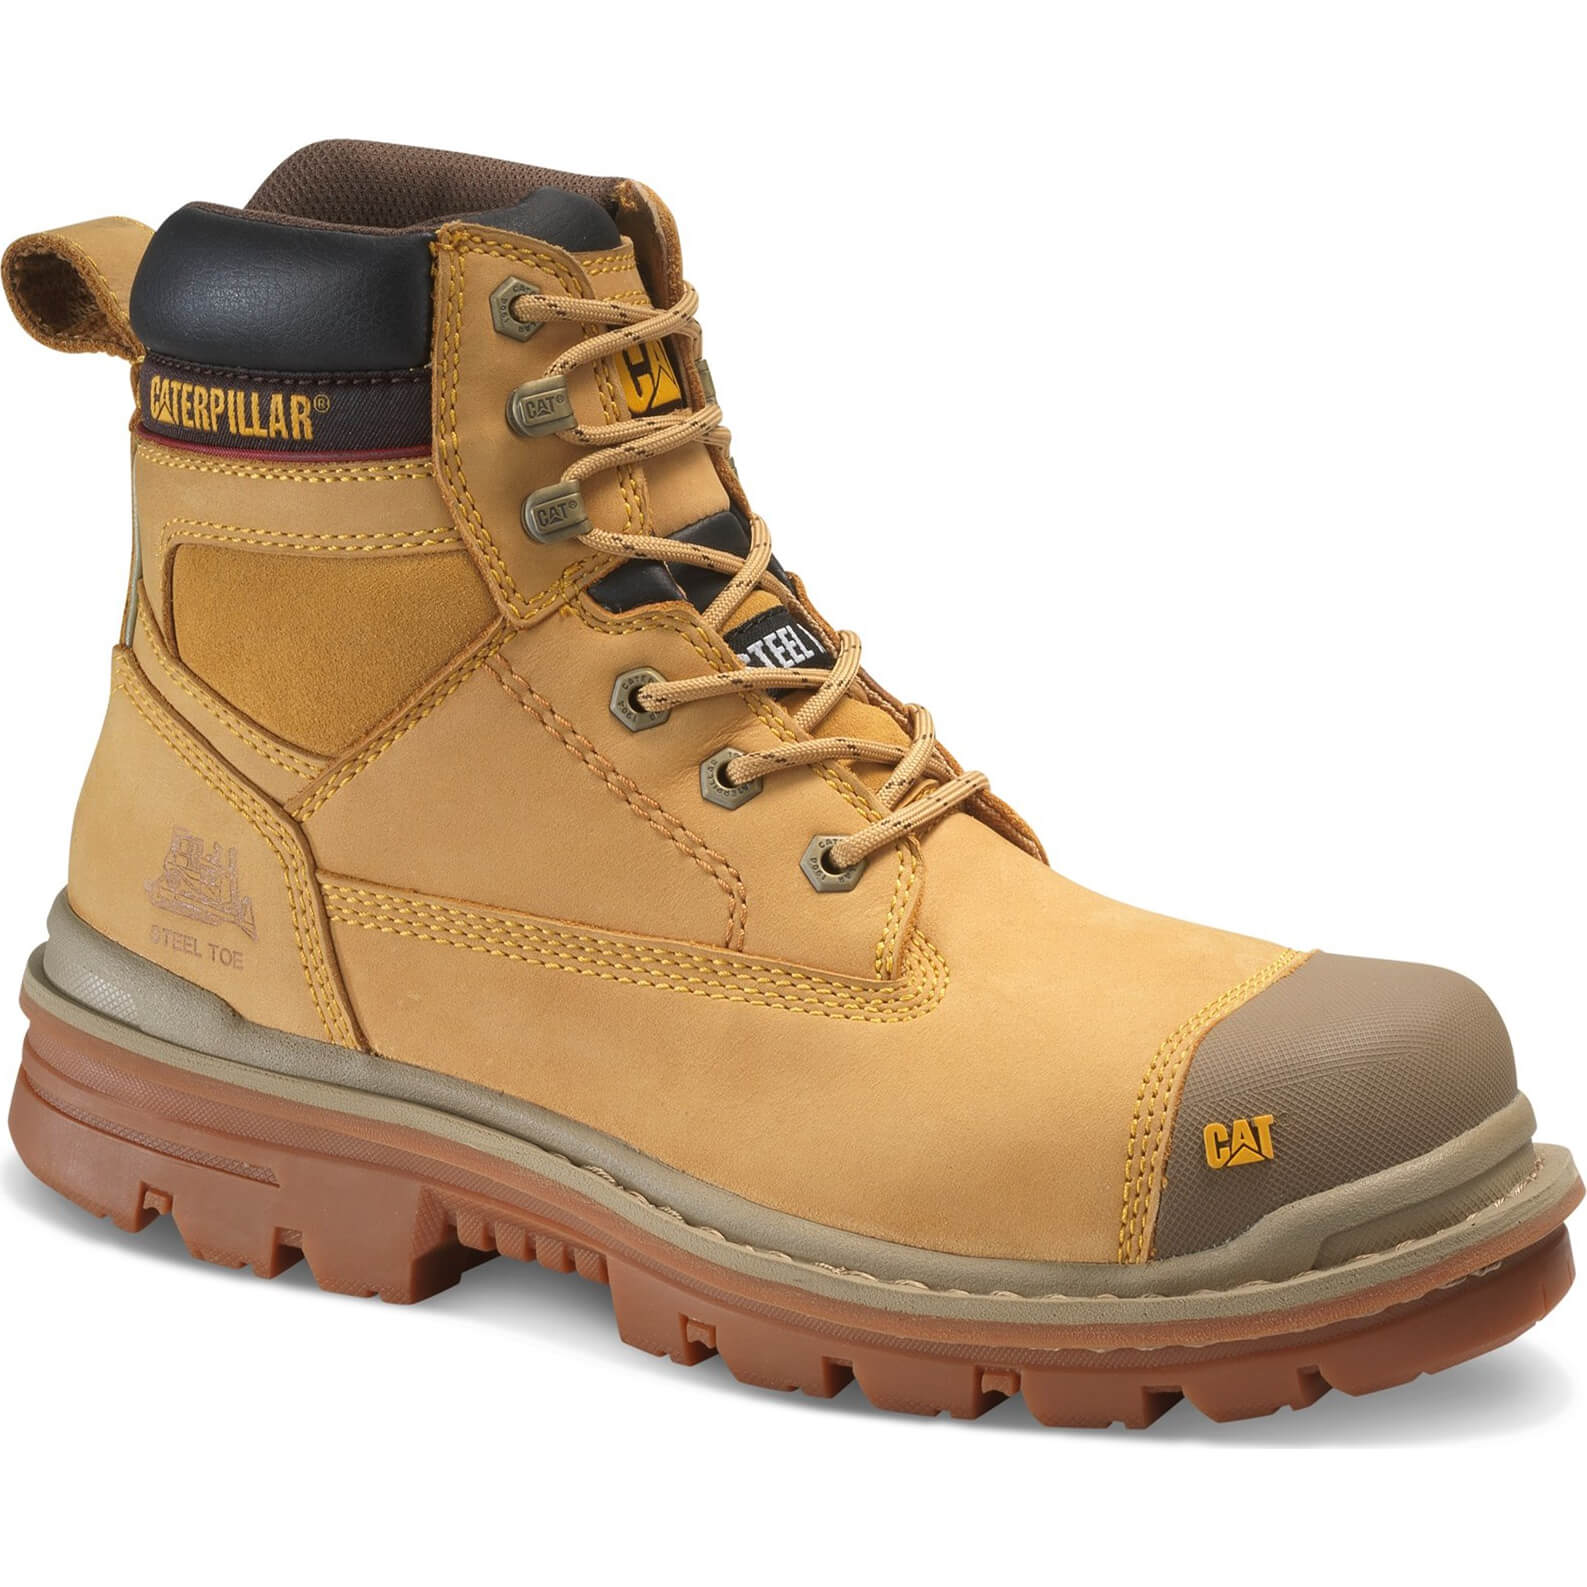 Image of Caterpillar Mens Gravel Safety Boots Honey Size 10